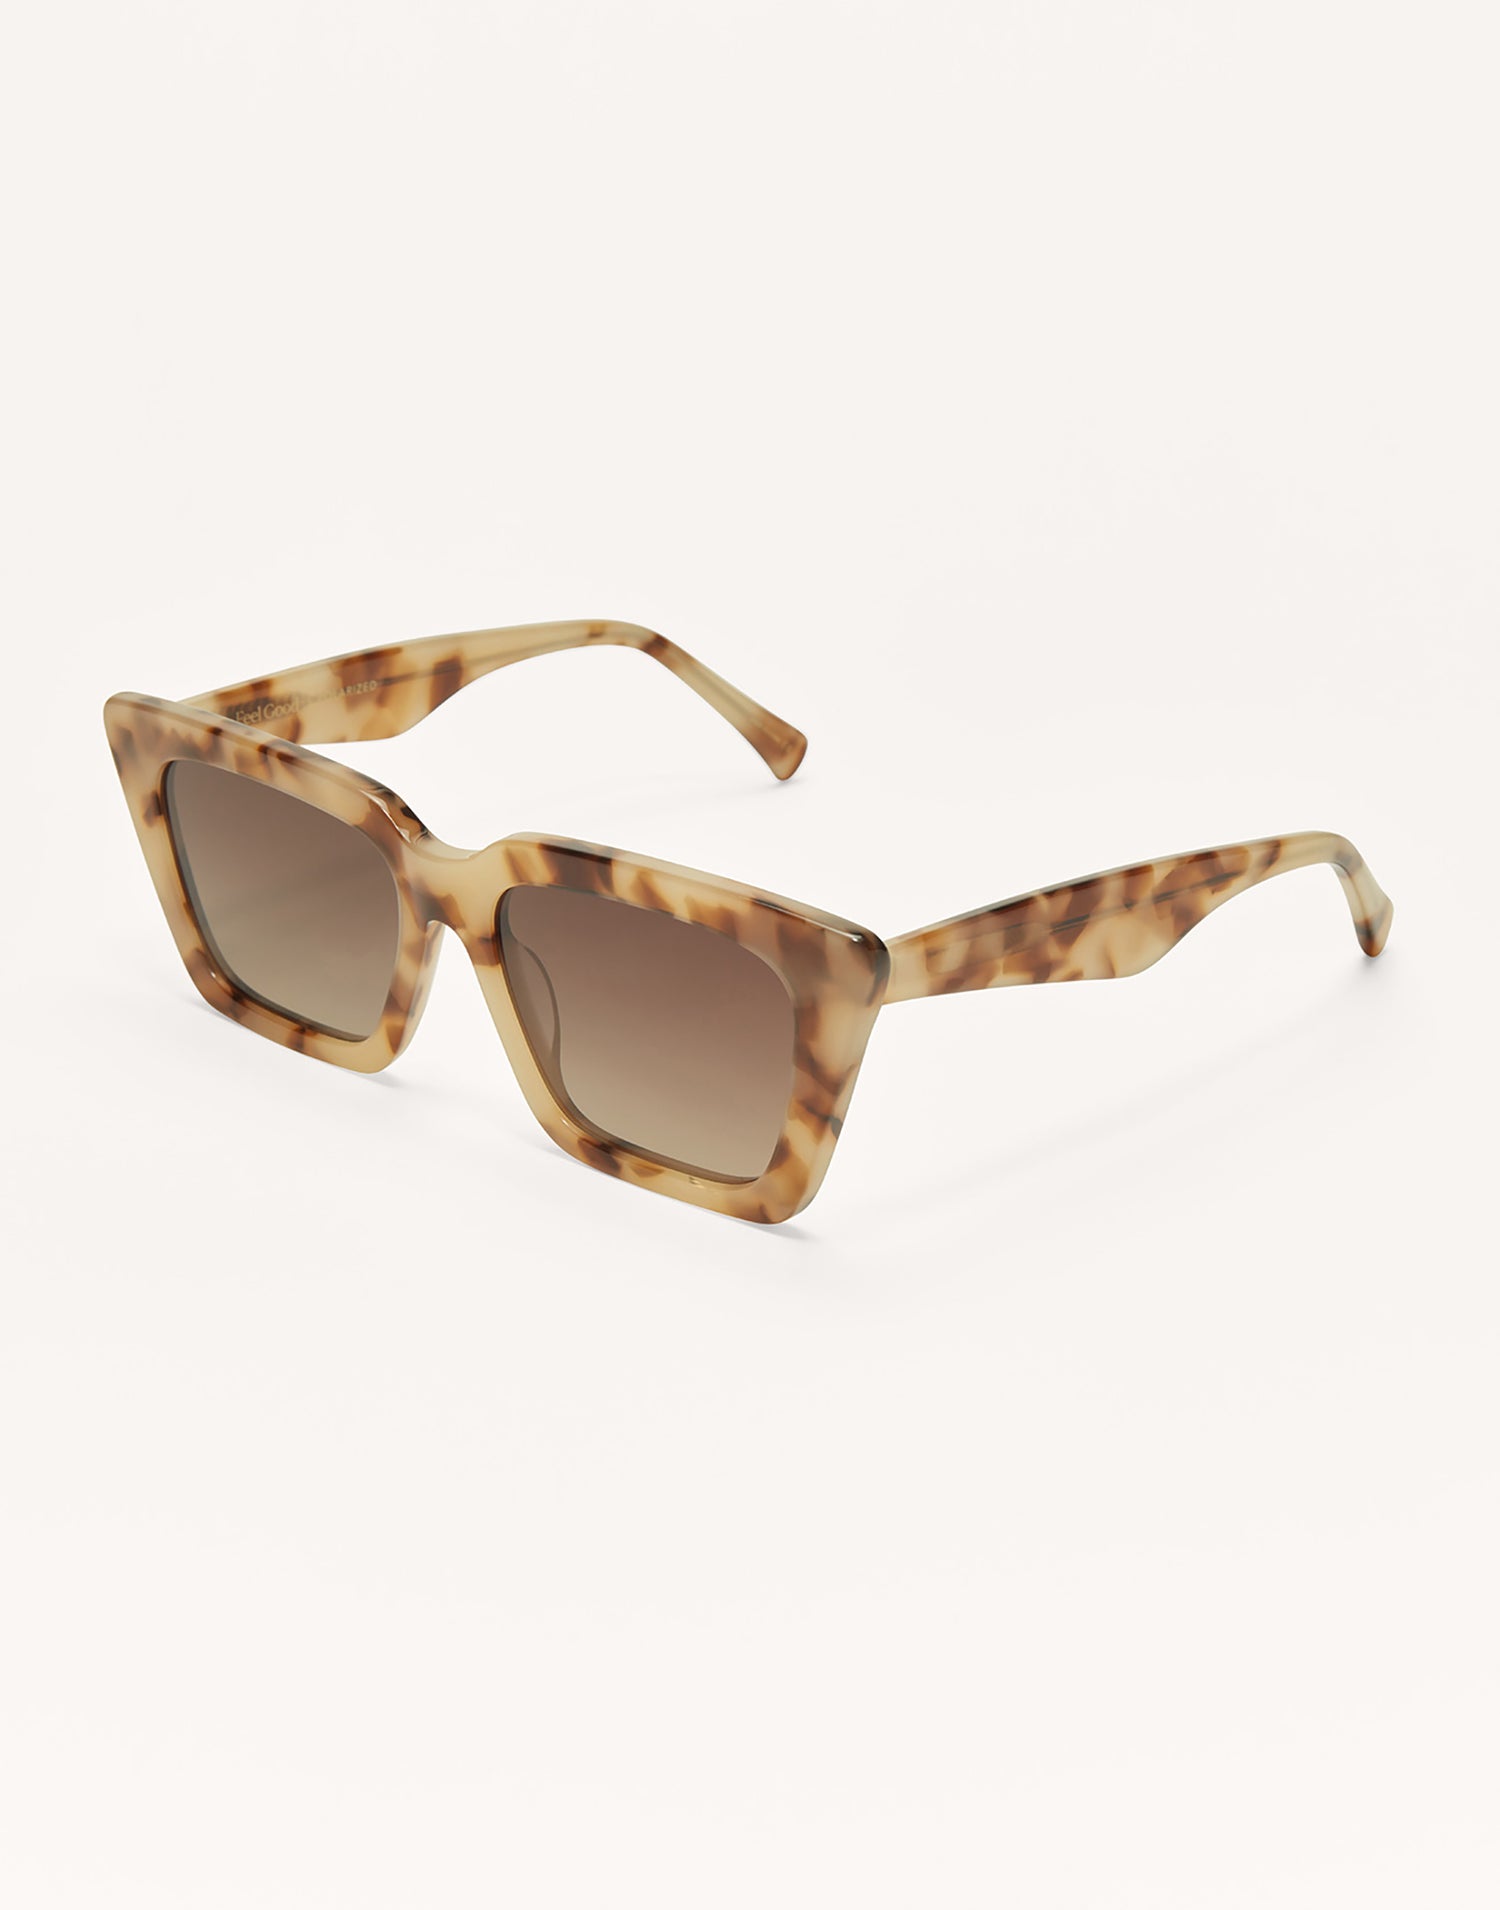 Feel Good Sunglasses by Z Supply in Blonde Tort - Angled View